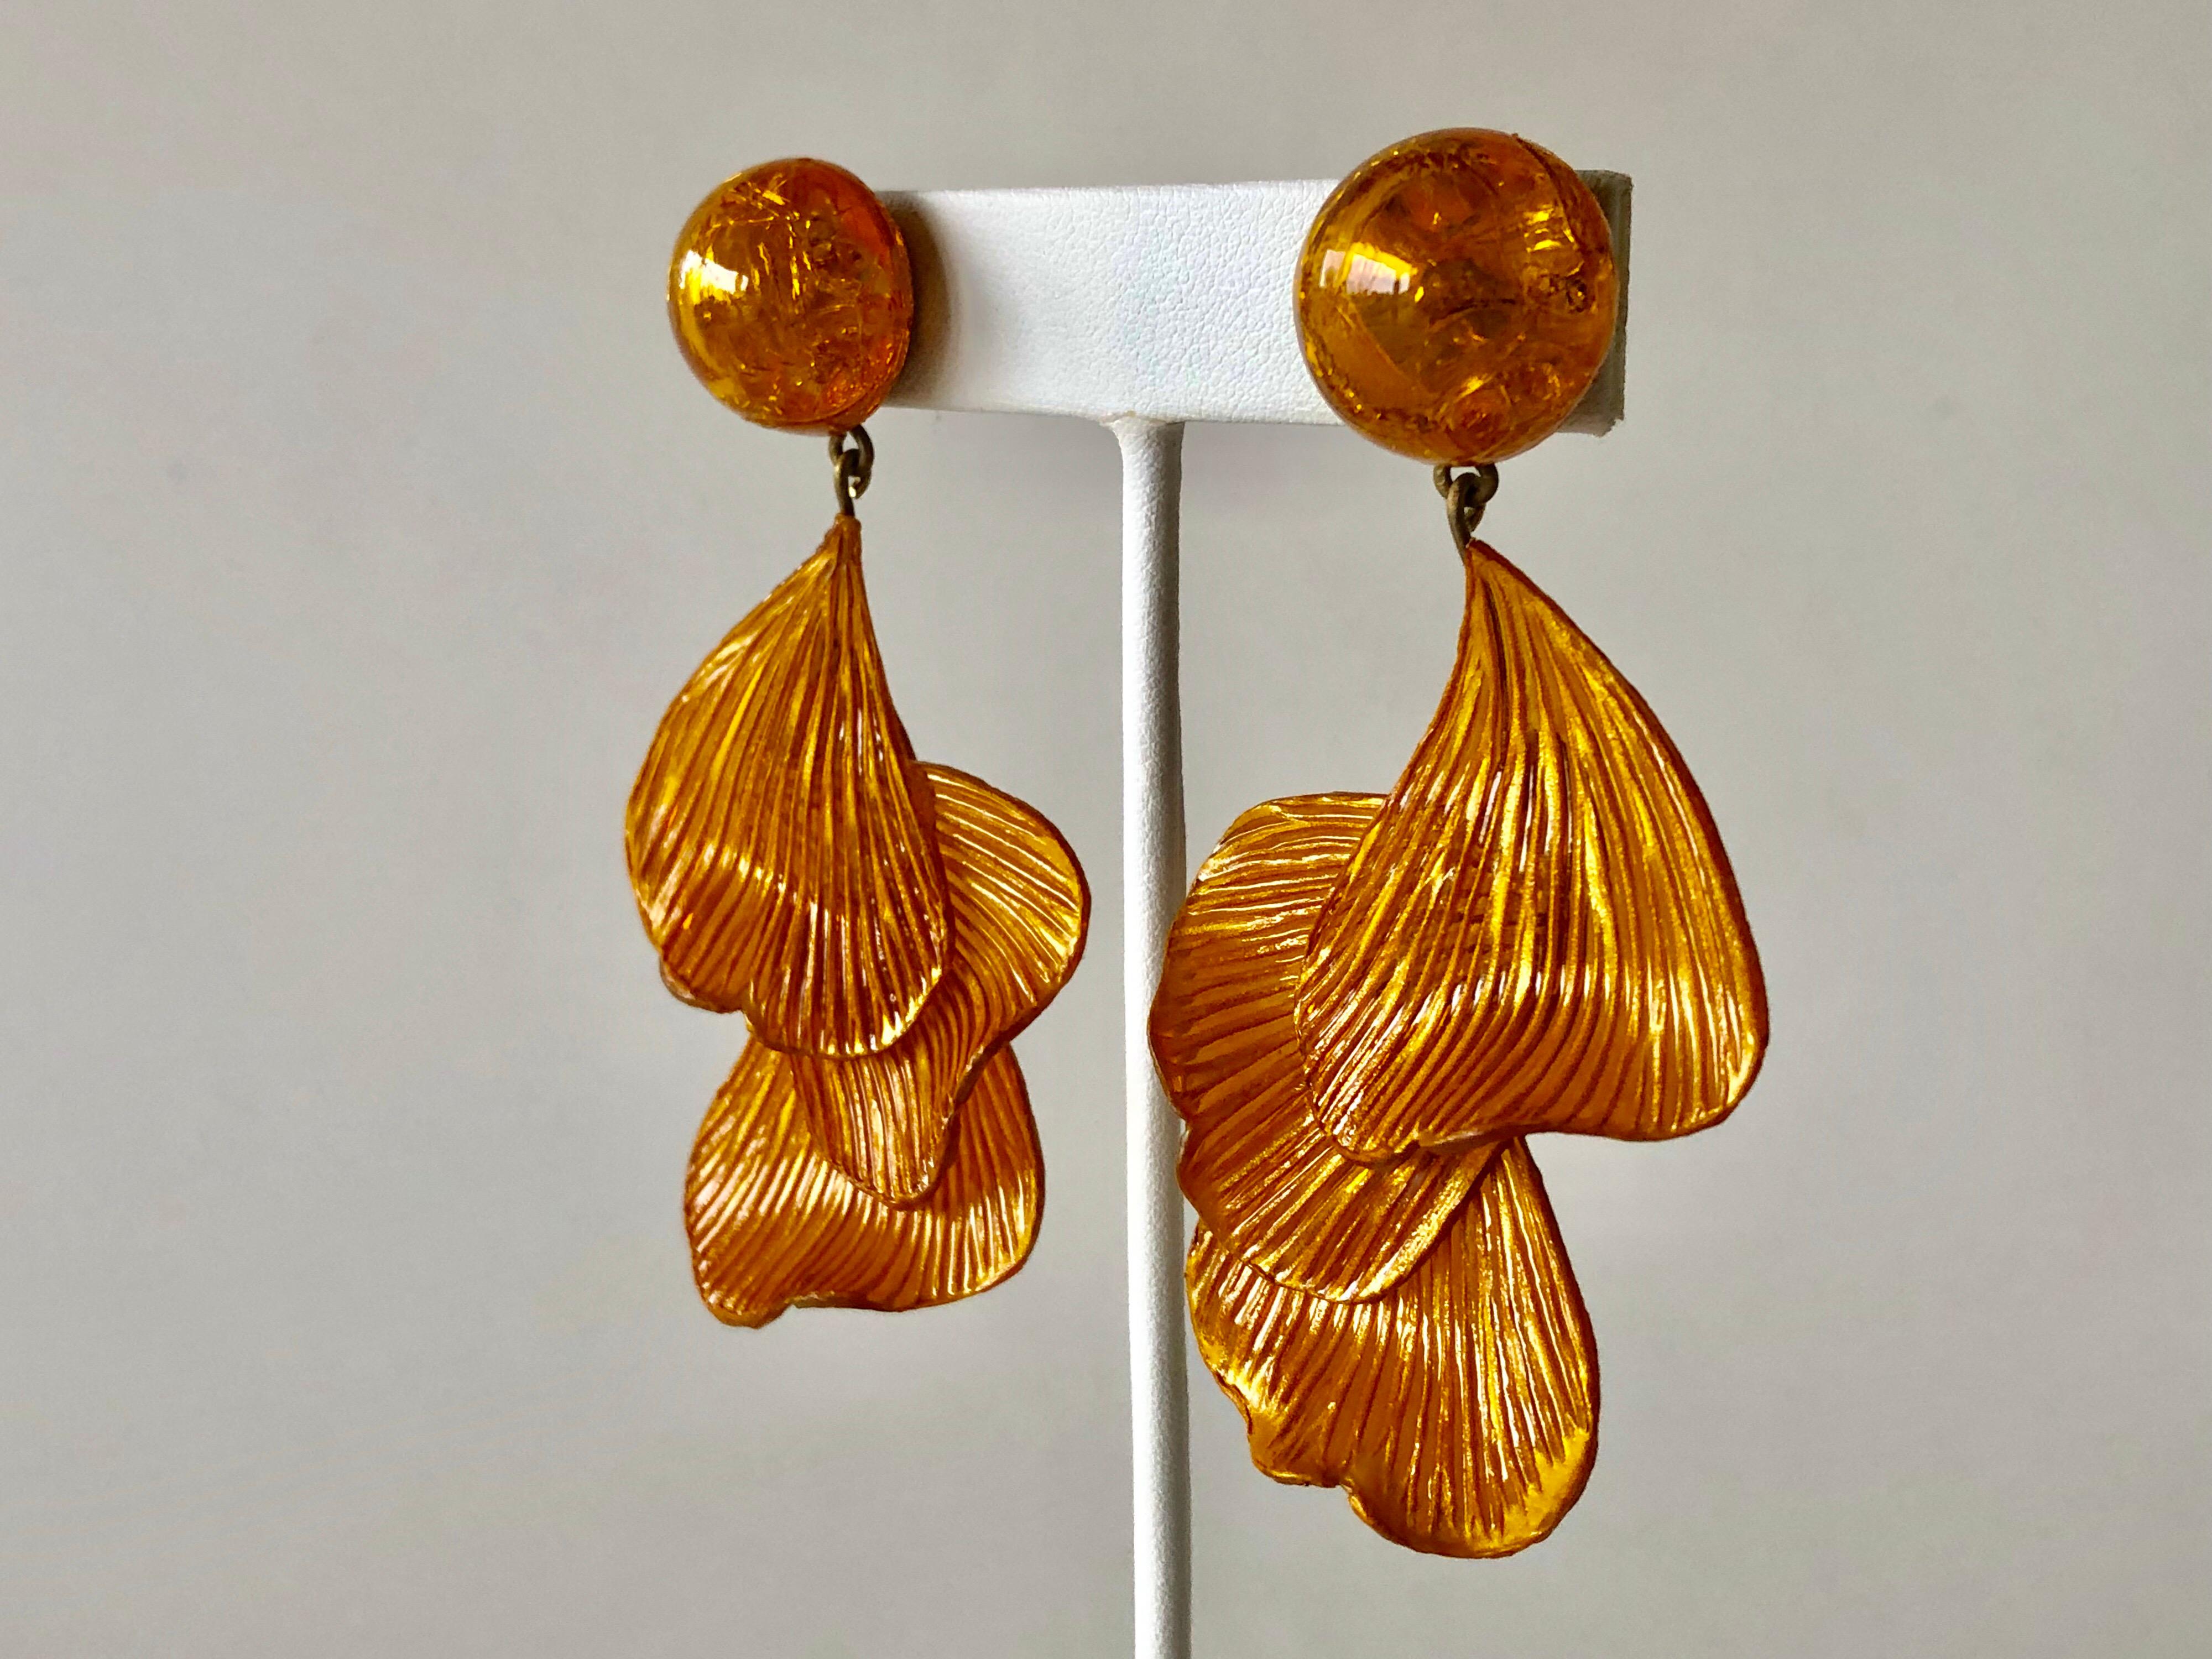 Light and easy to wear, these handmade artisanal pierced earrings were made in Paris by Cilea. The lightweight clip-on earrings feature molded wave segments of enameline (enamel and resin composite) in orange, almost resembling whimsical fish tails.